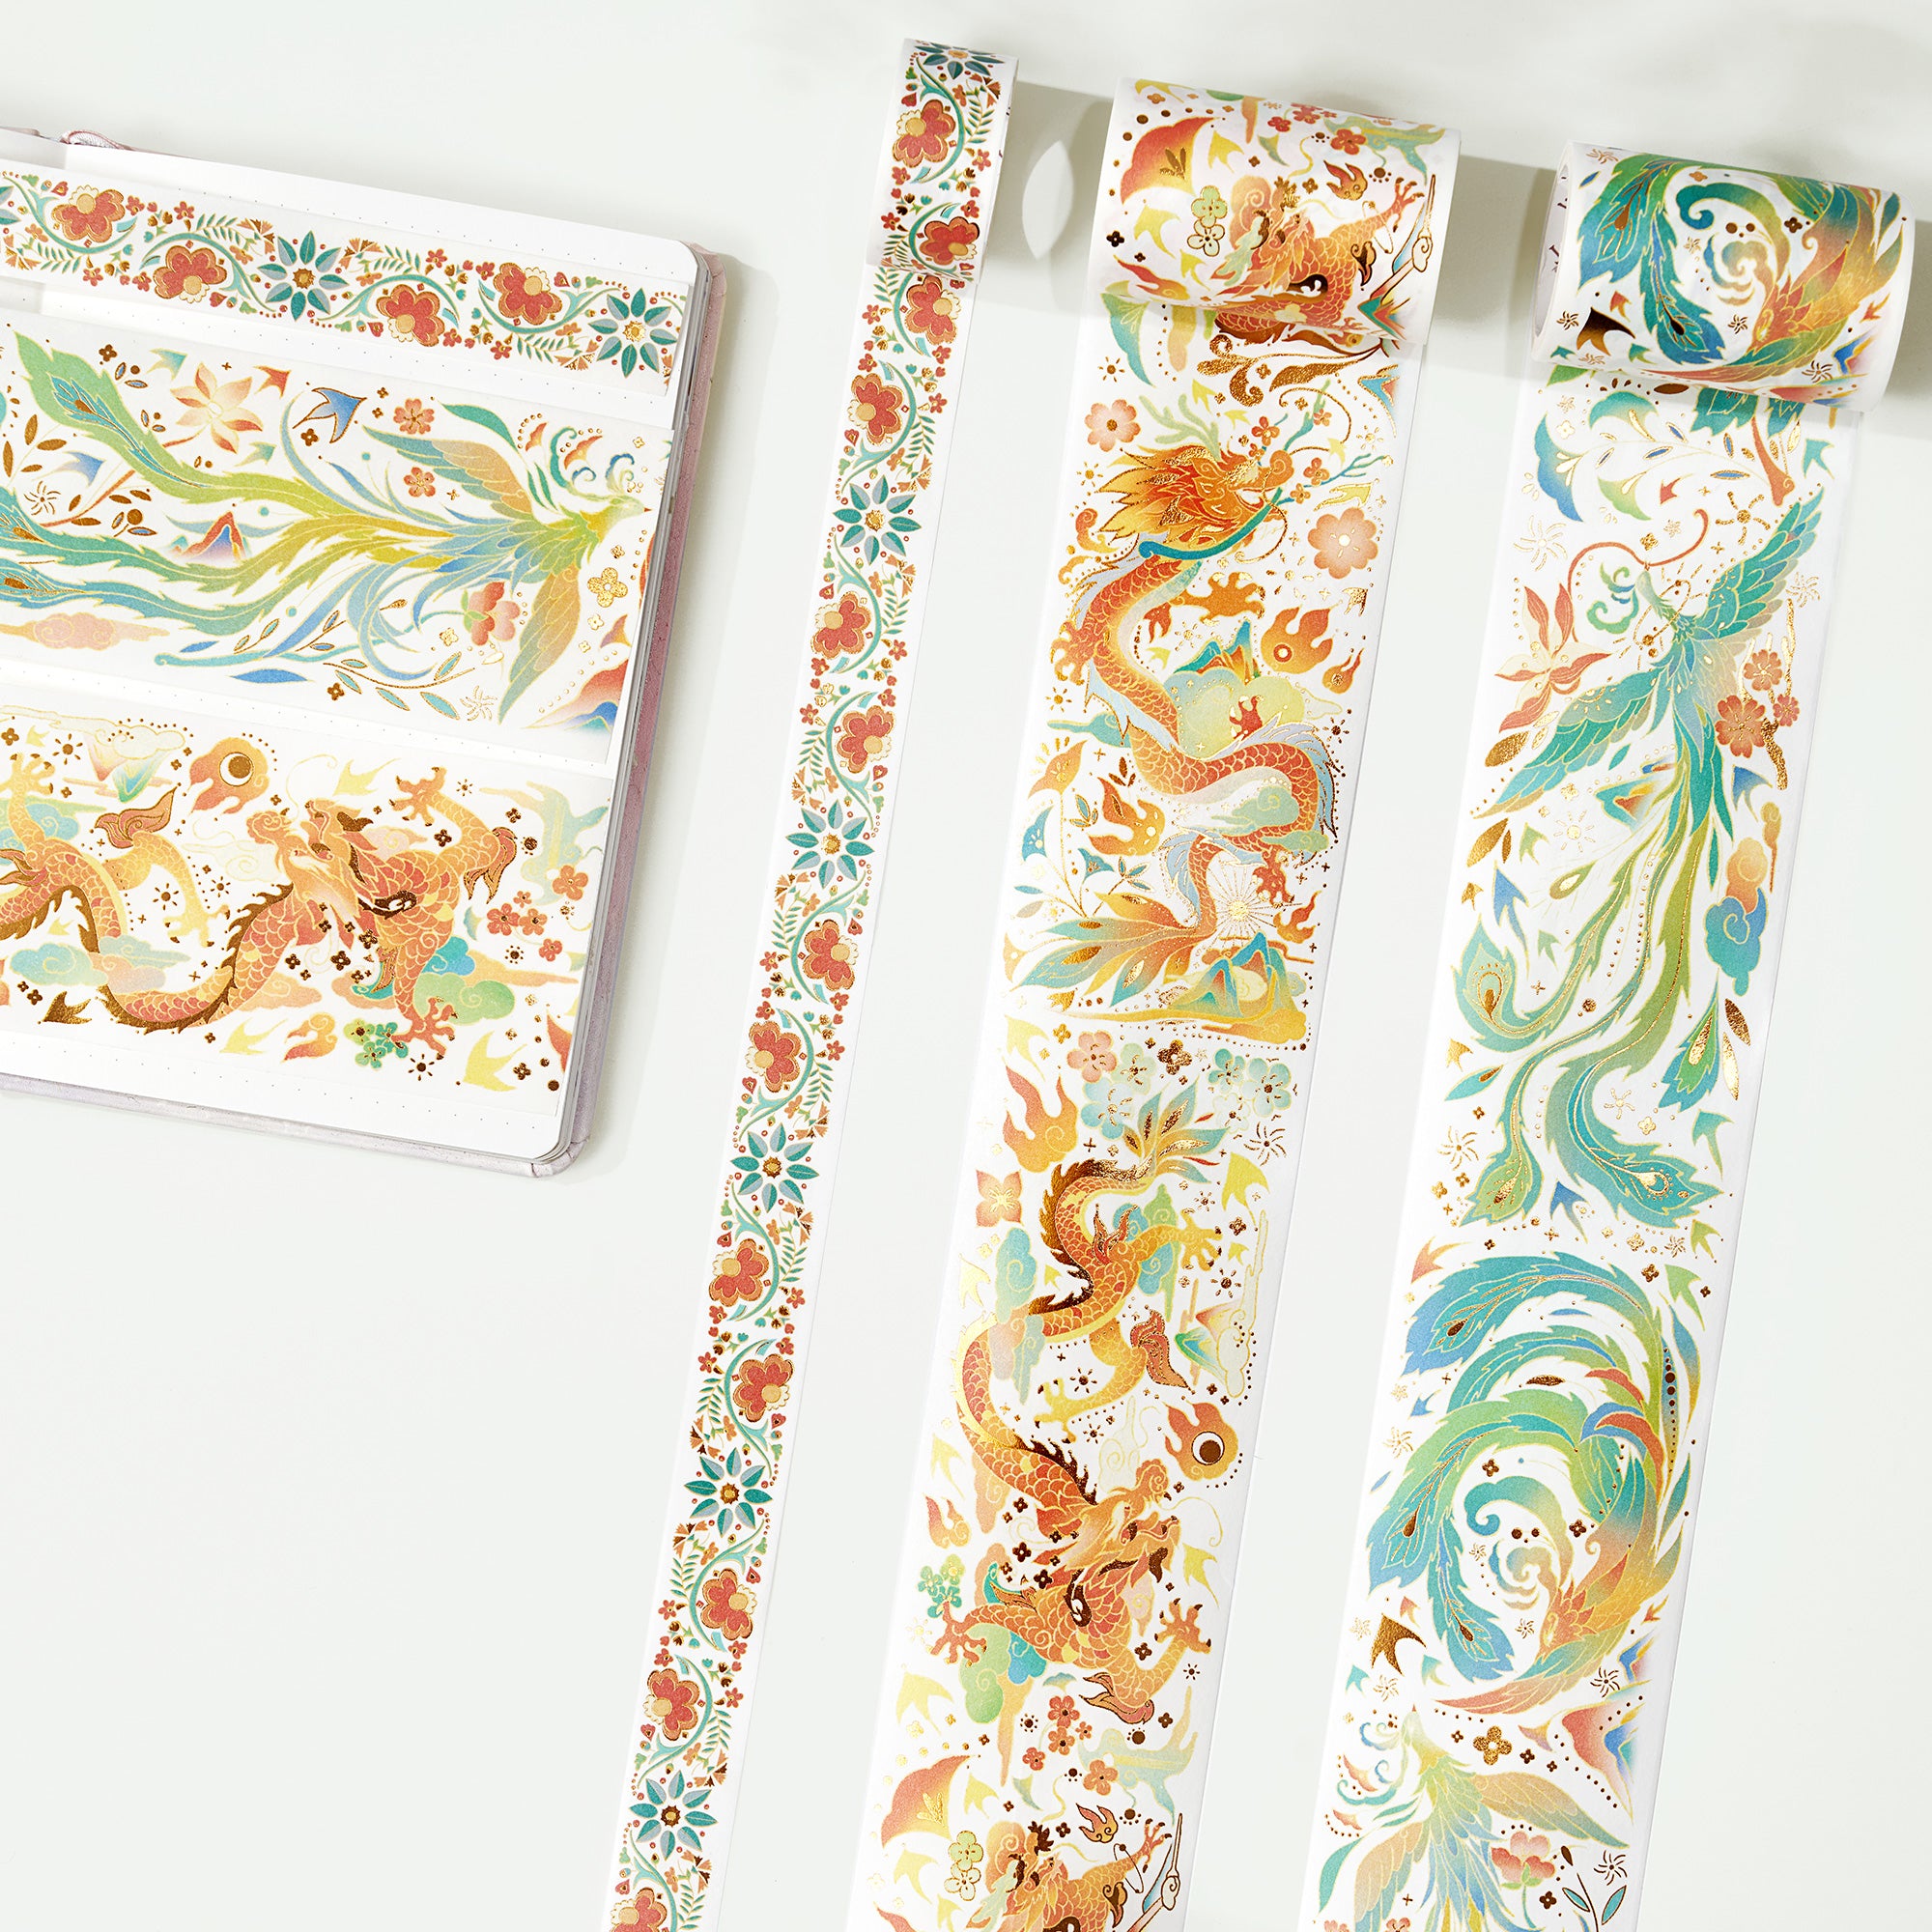 Year of the Dragon Washi Tape Set | The Washi Tape Shop. Beautiful Washi and Decorative Tape For Bullet Journals, Gift Wrapping, Planner Decoration and DIY Projects